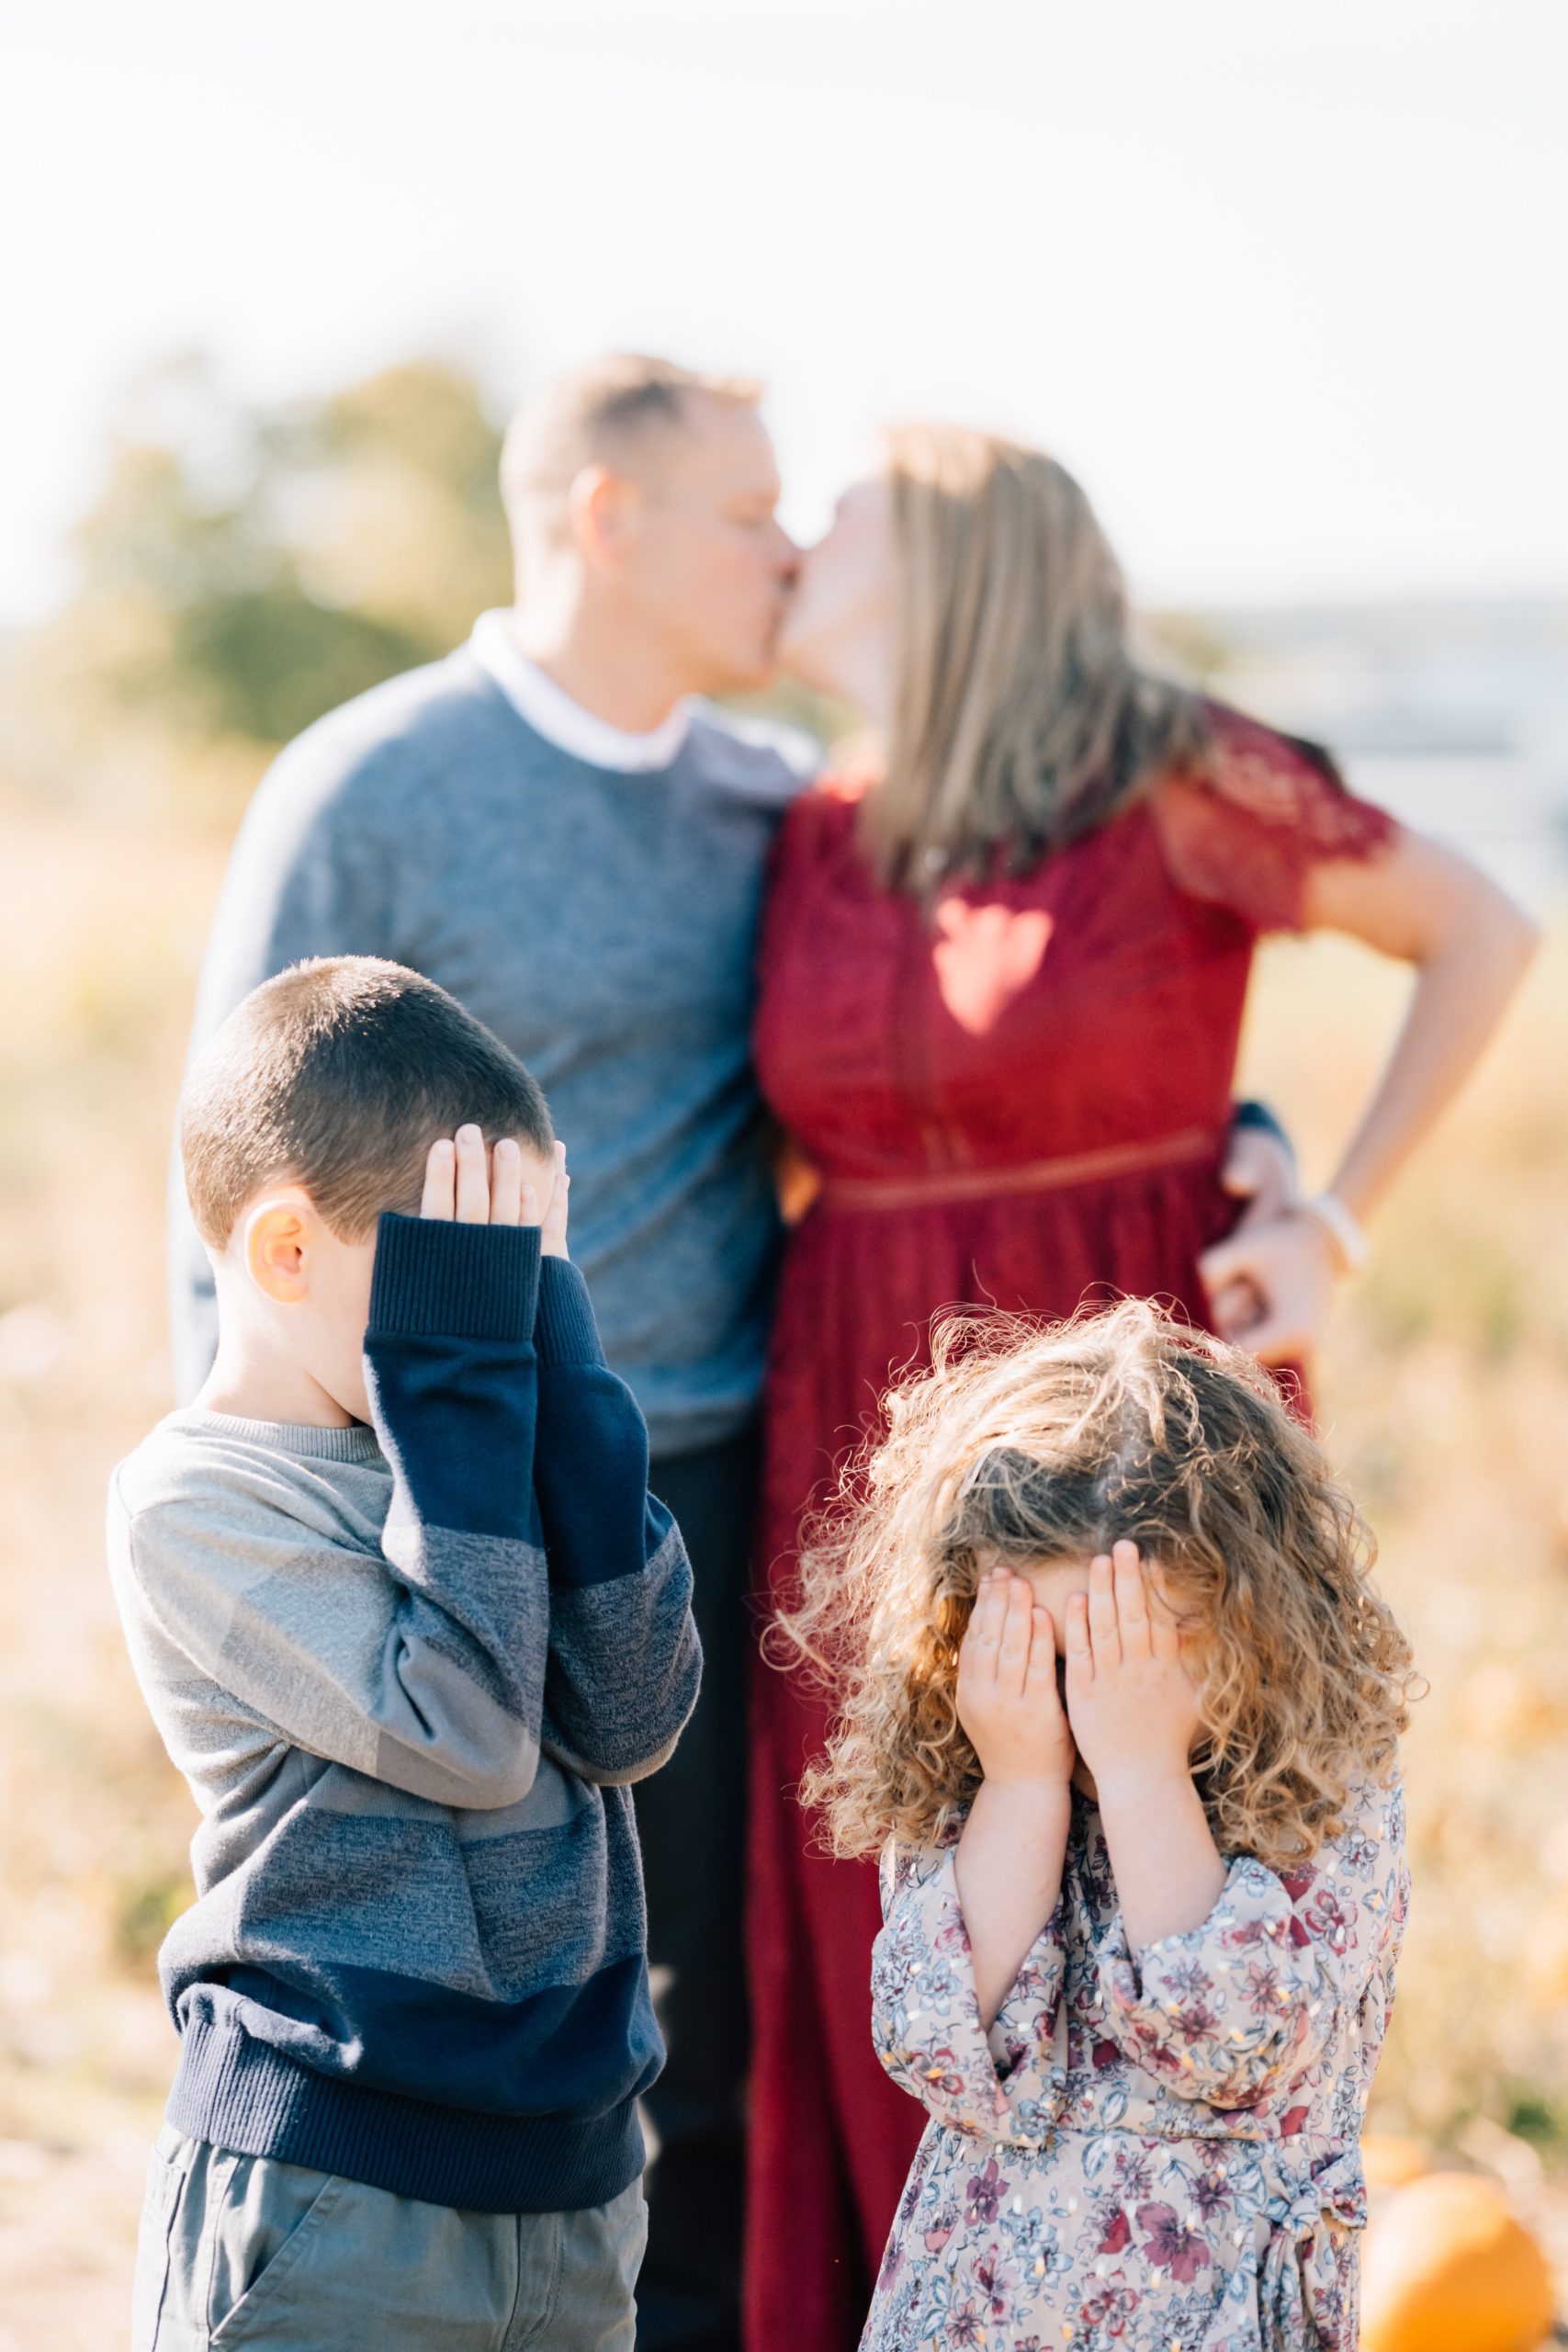 Family of 4 mom and dad kissing with kids covering eyes during fall mini portrait session at Pumpkin Junction at Everitt Farms in Flemington, NJ Ringoes, NJ with Motherhood and Family Photographer Anne Haug of Golden Heart Photography.